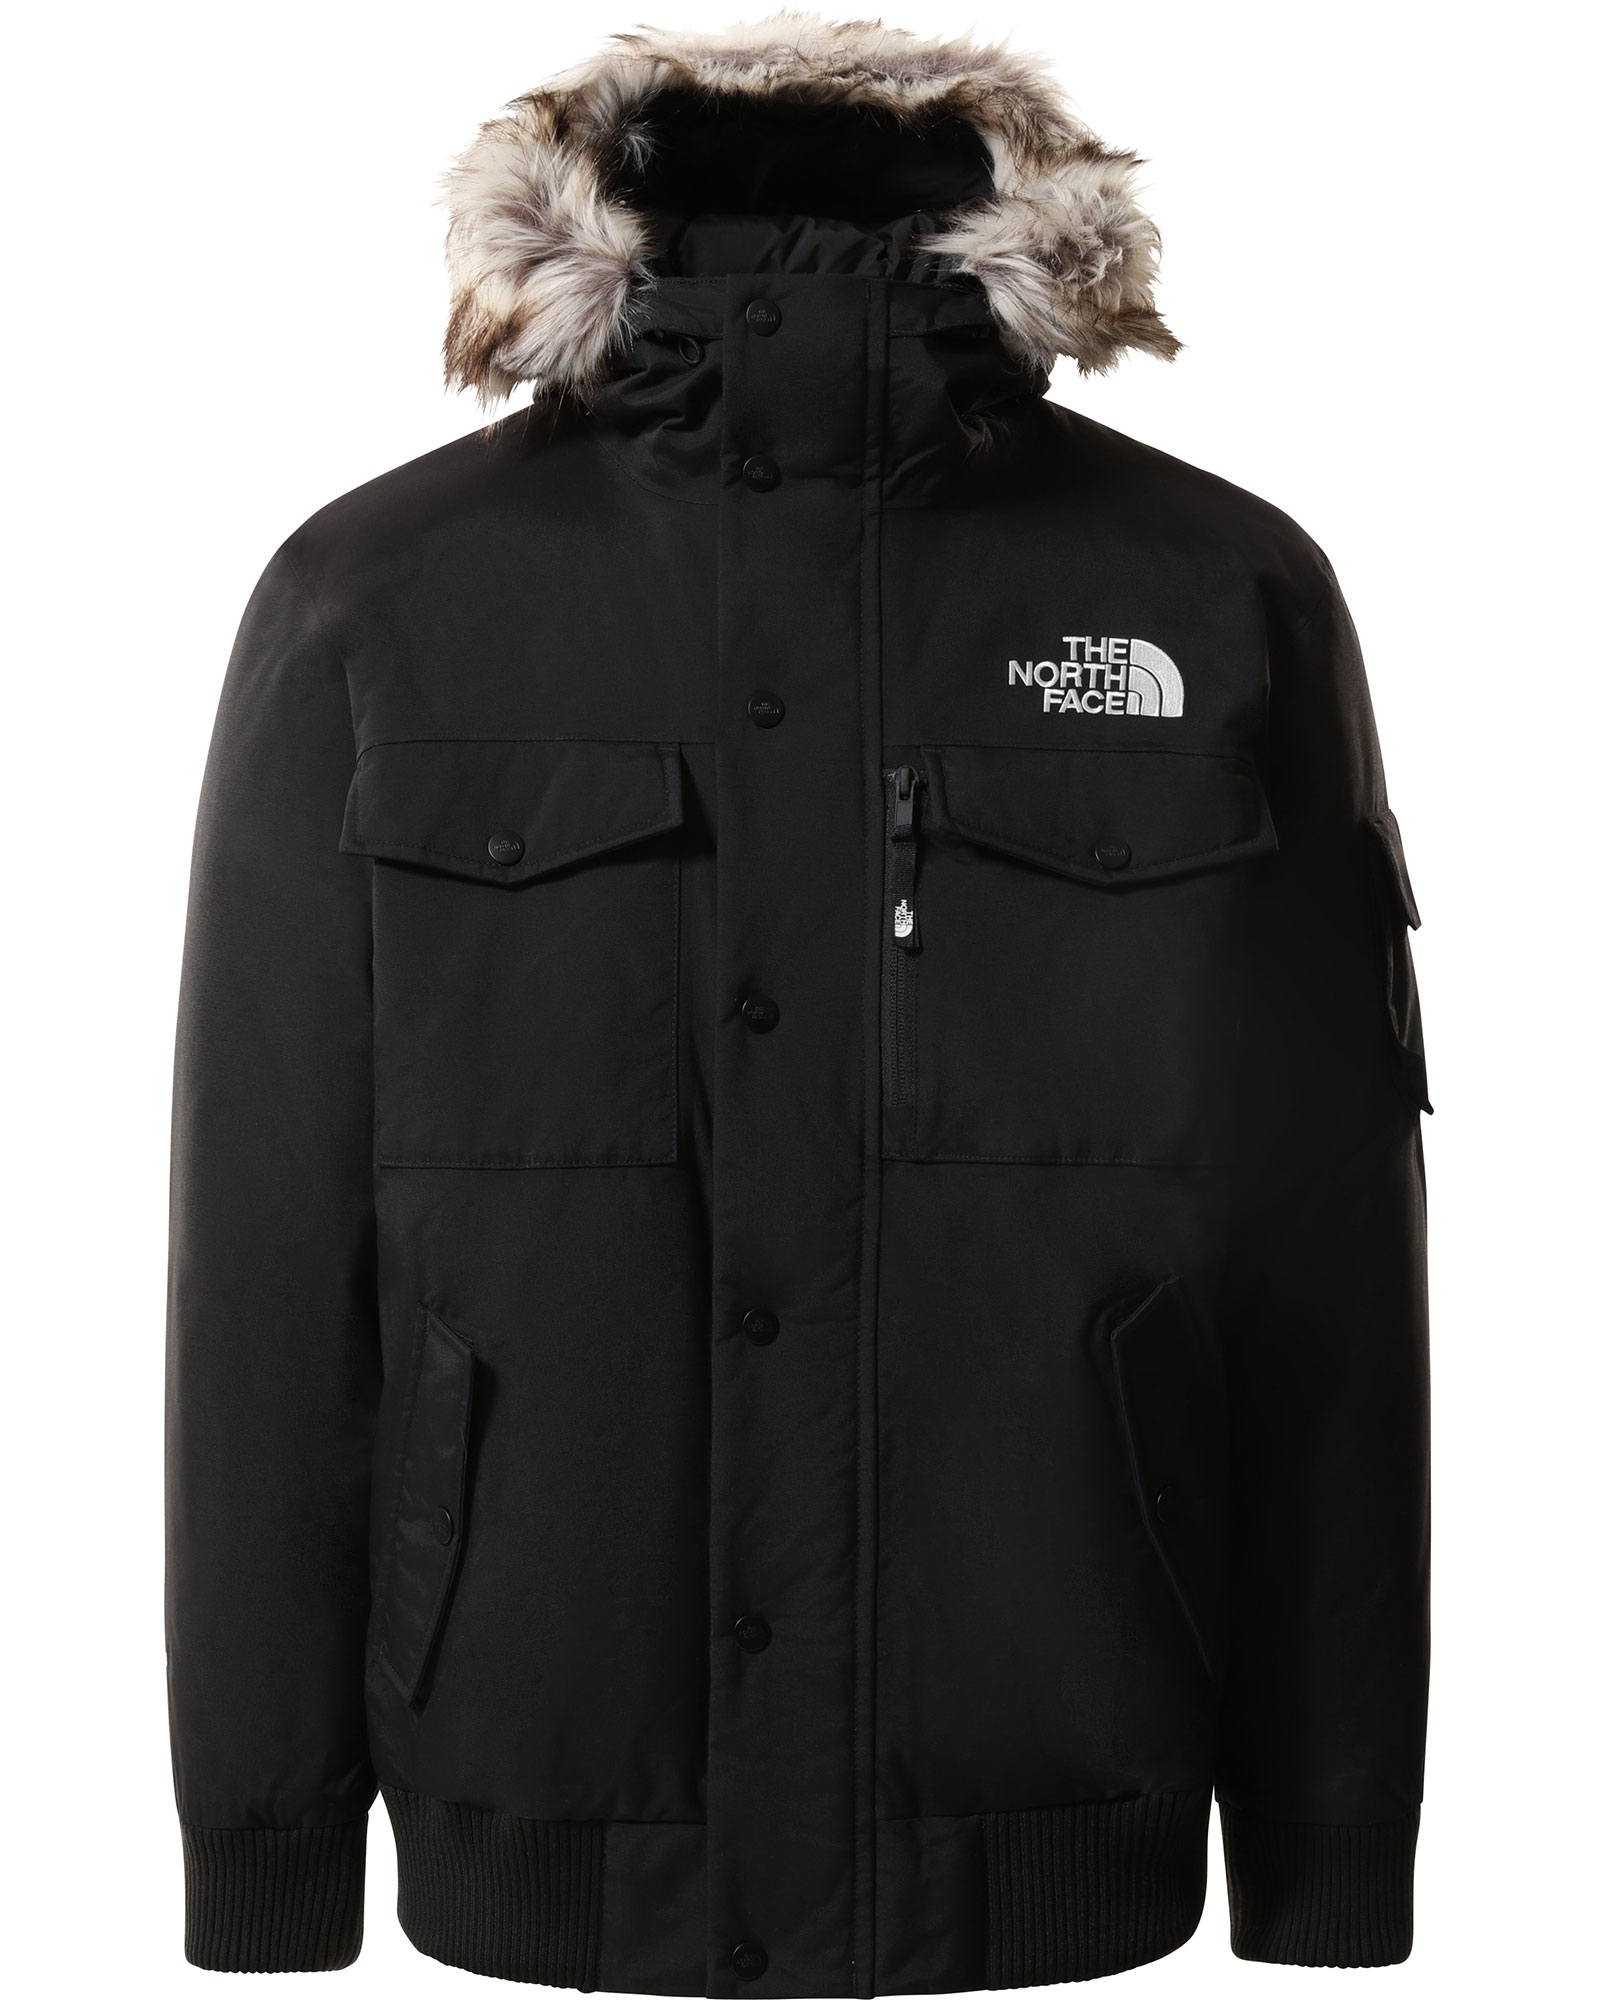 The North Face Men's Gotham Down Jacket